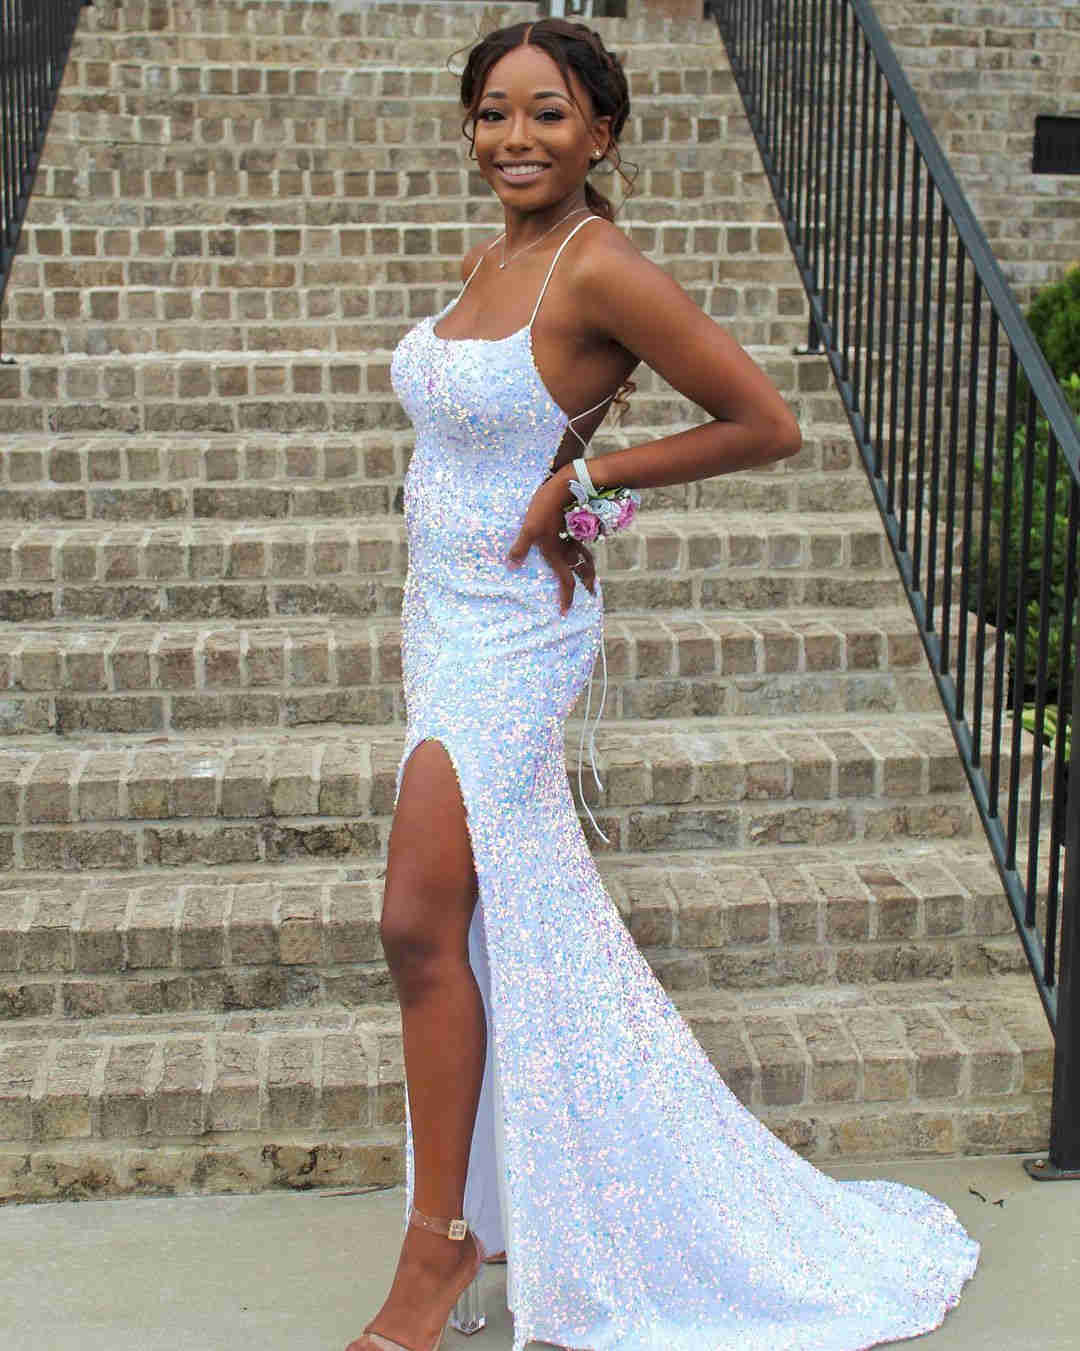 Mermaid Sequined Long Prom Dress with Slit?Mermaid Sequined Long Prom Dress with Slit?long dress,cheap dress,evening dress,bridal dress,prom dress 2021